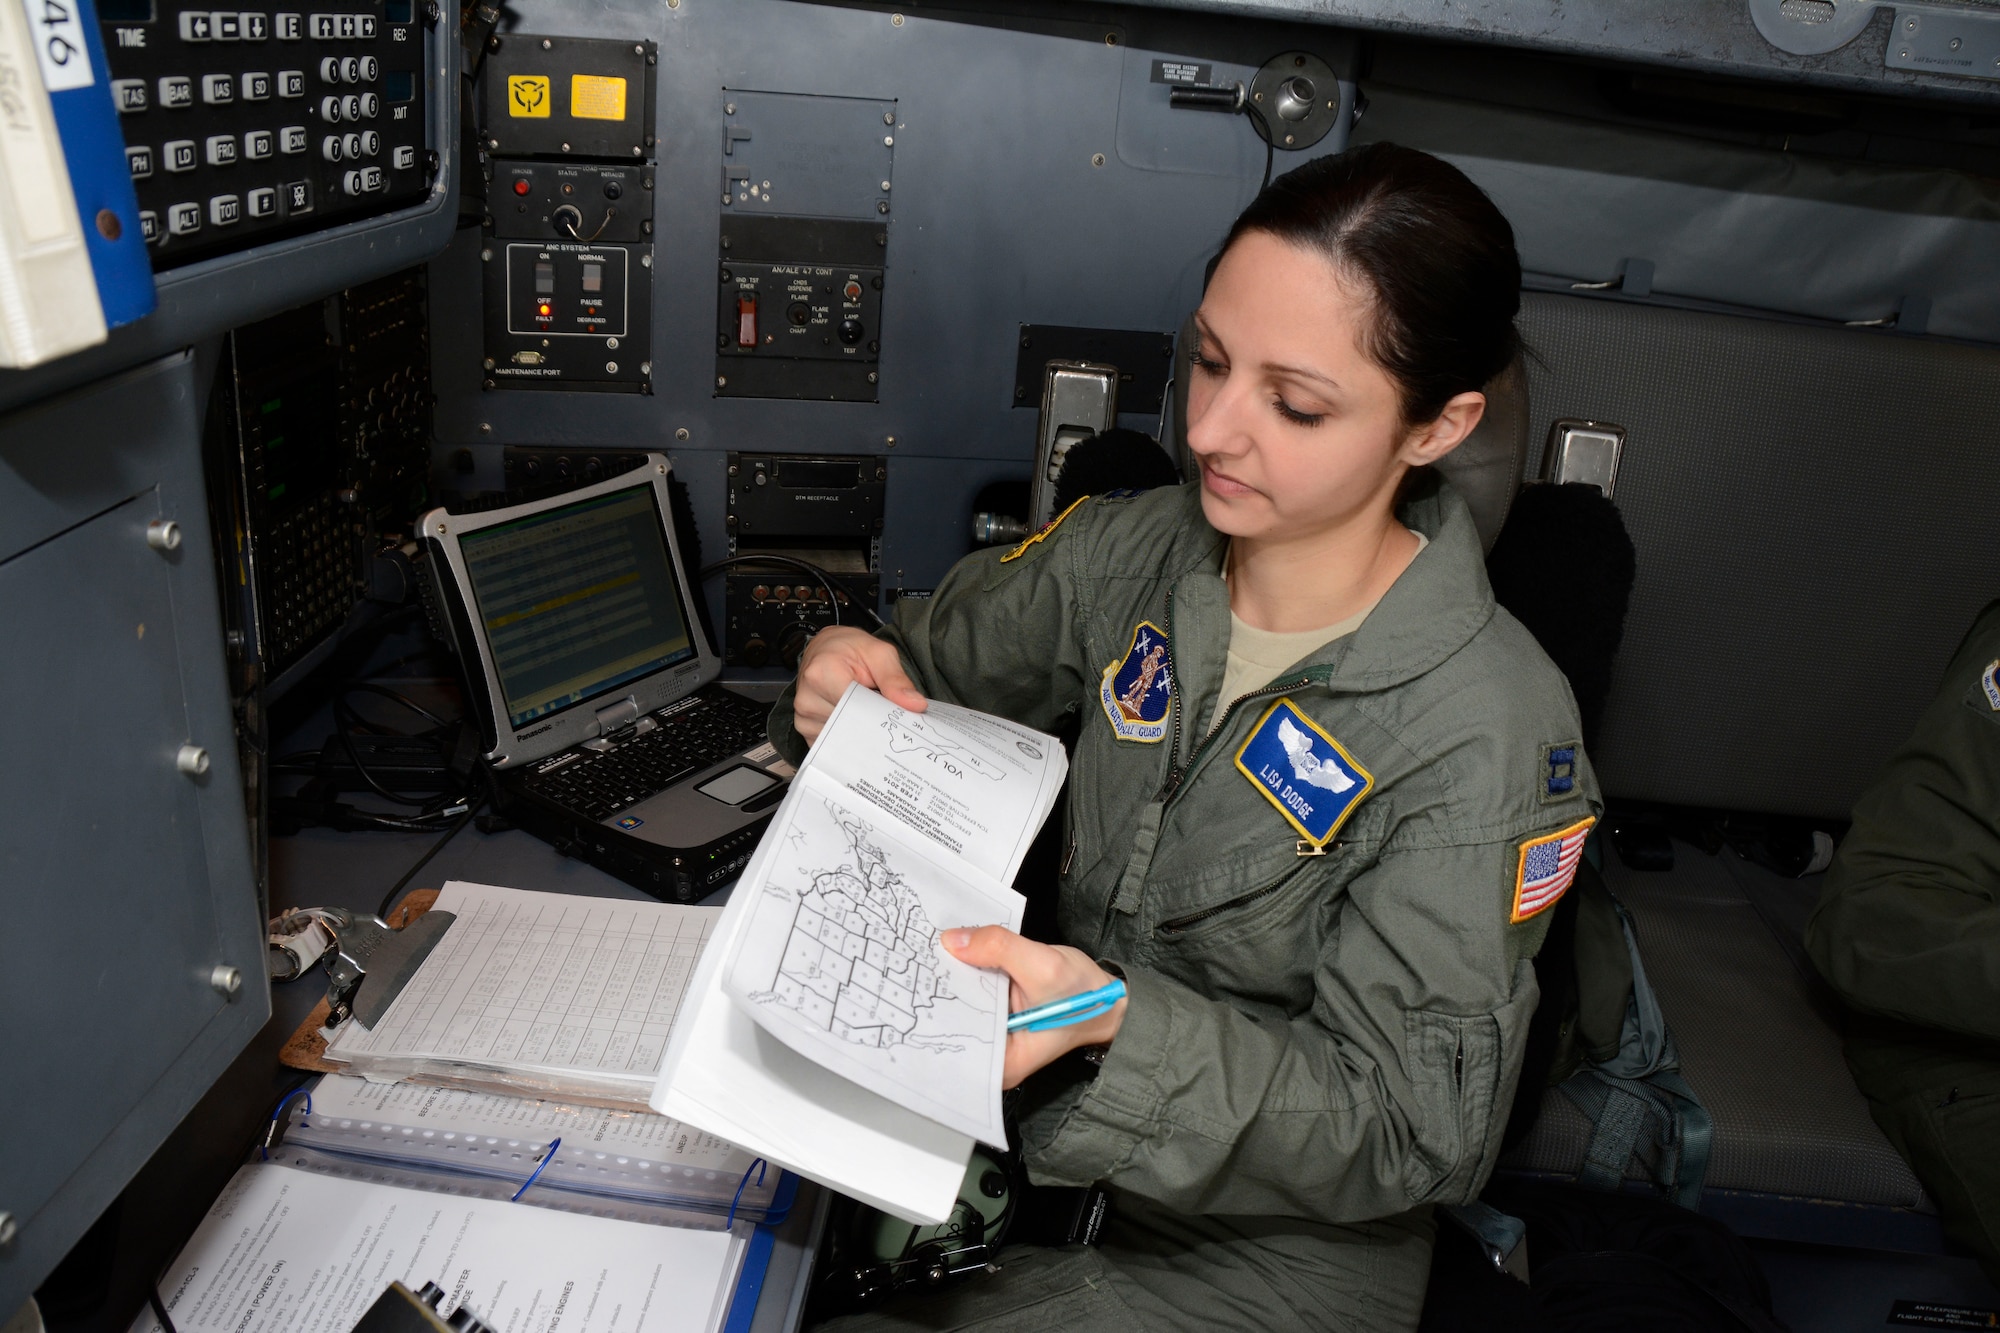 U.S. Air Force Capt. Lisa Dodge, navigator for the 156th Airlift Squadron, conducts preflight inspection onboard a C-130 Hercules aircraft prior to taking off from the North Carolina Air National Guard Base, Charlotte Douglas International Airport, March 3, 2016. Dodge is also the executive and training officer for the 145th Operations Support Squadron. (U.S. Air National Guard photo by Master Sgt. Patricia F. Moran/Released)